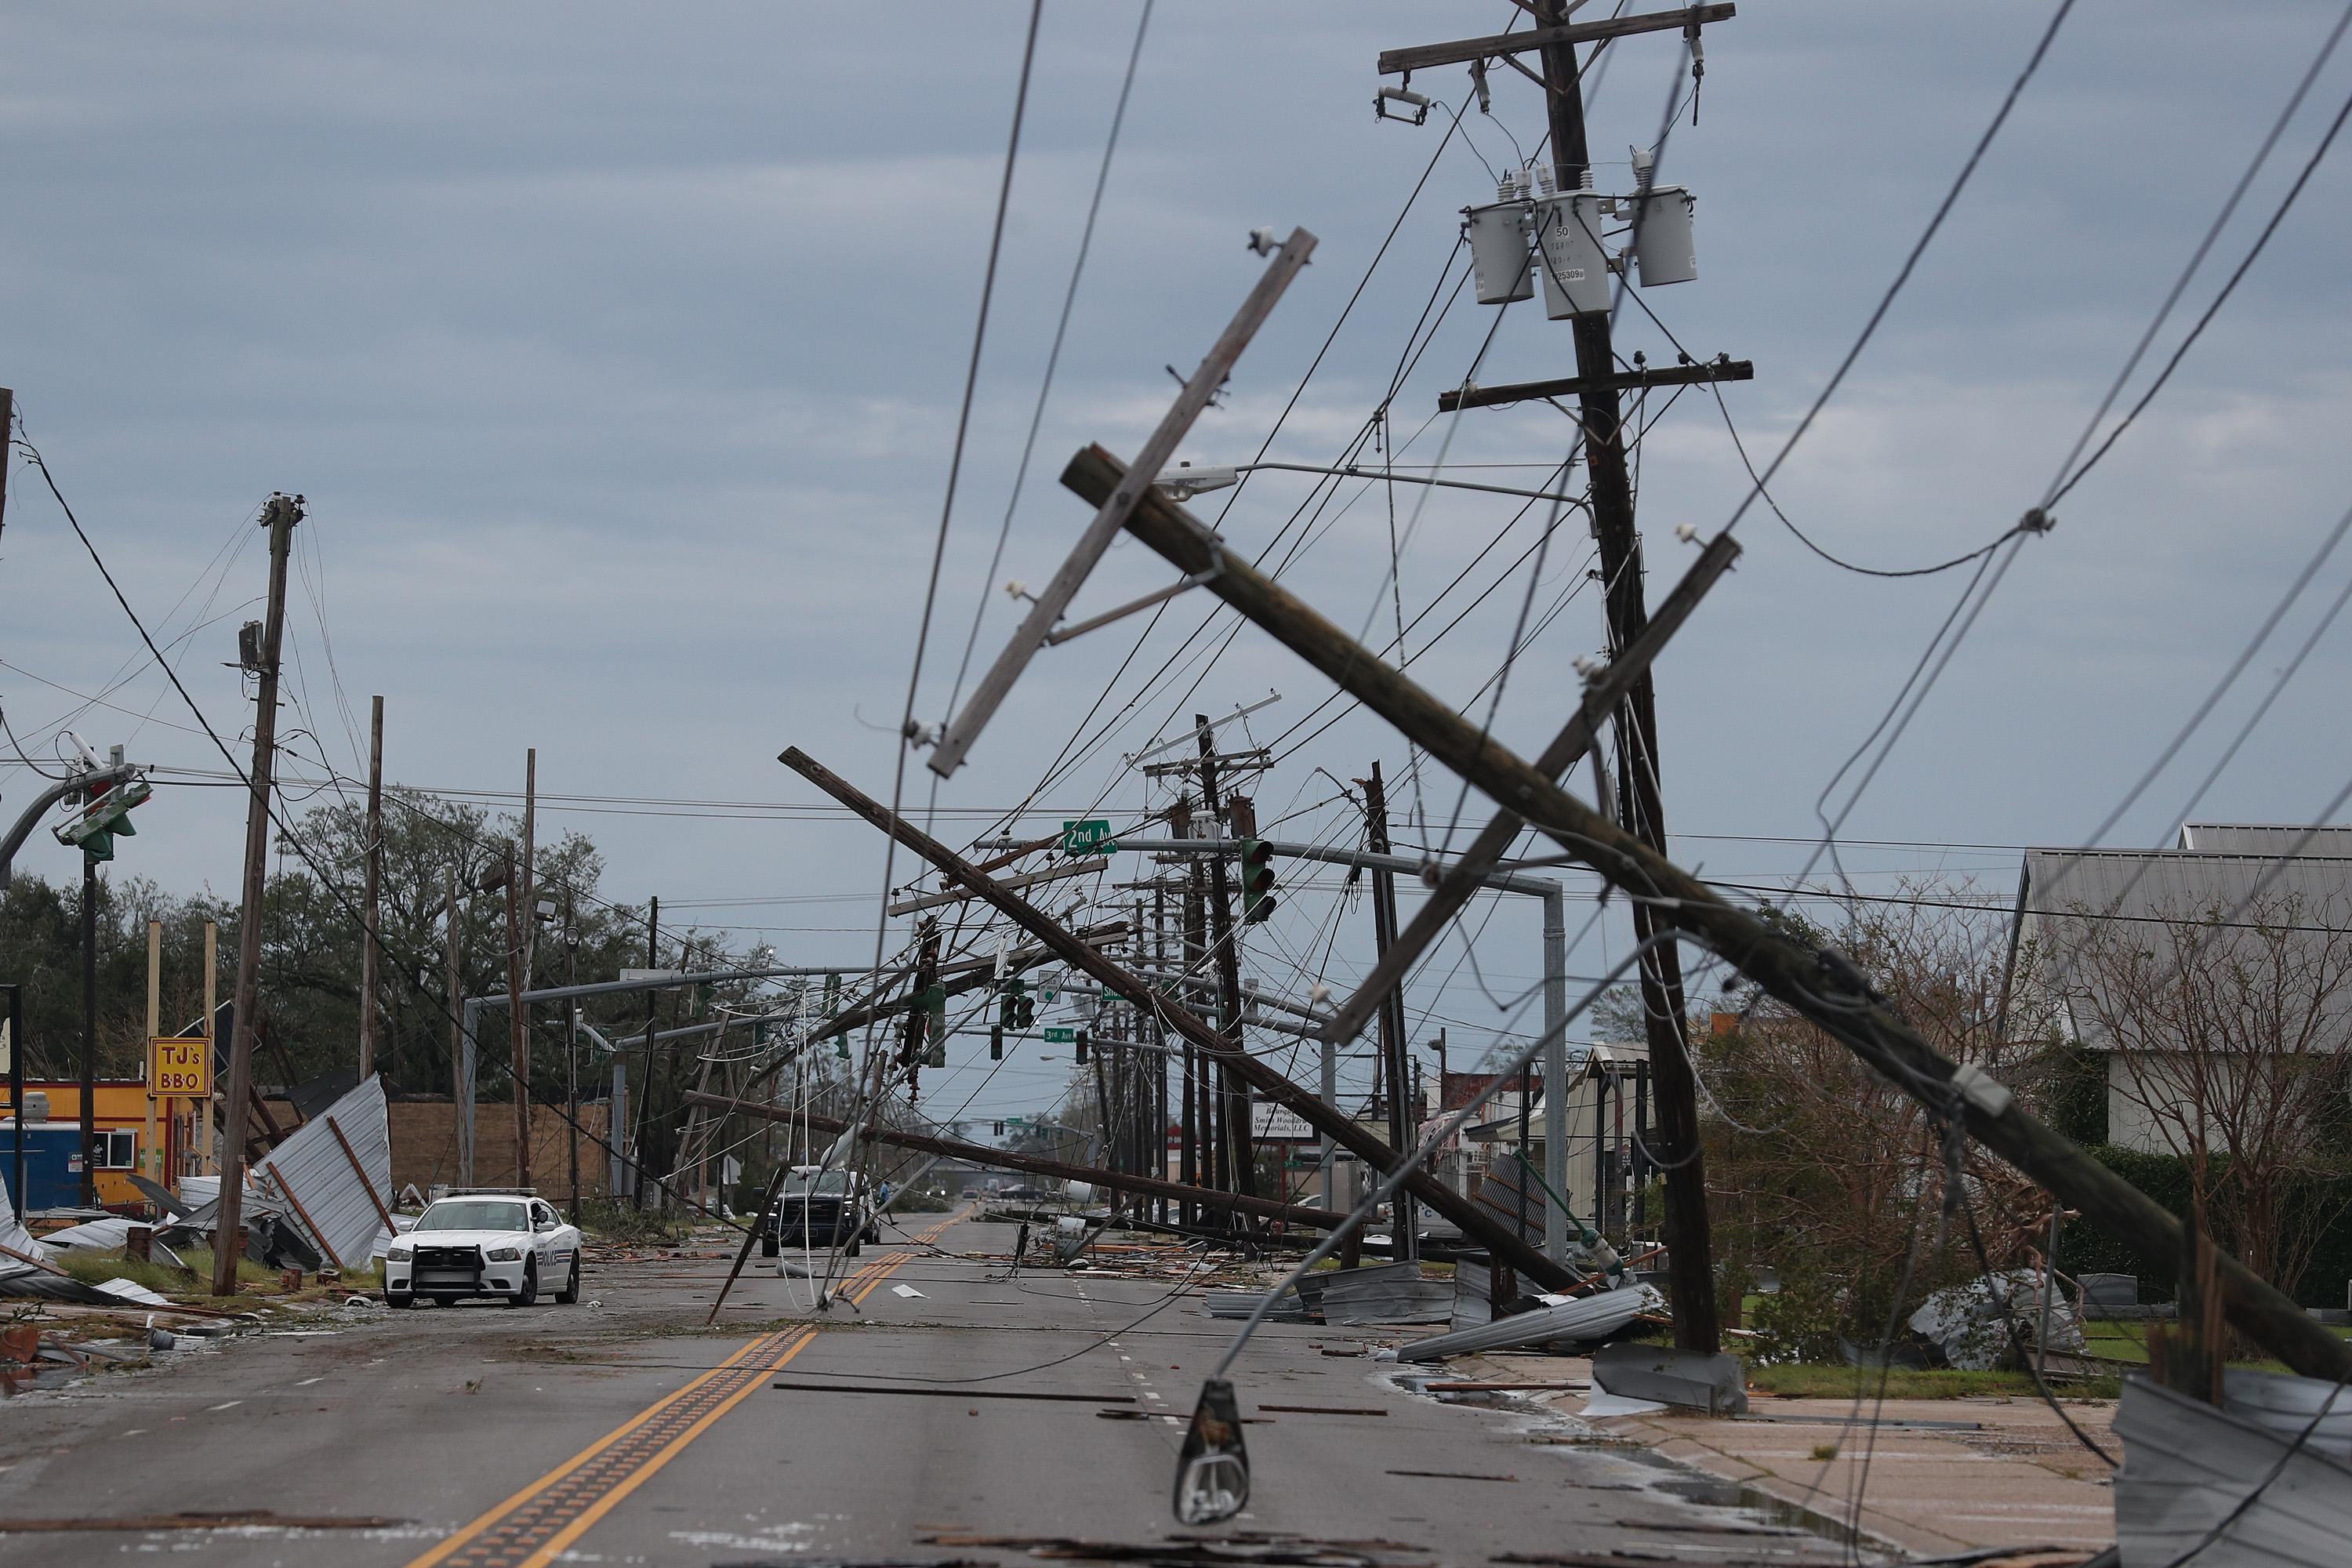 A street is seen strewn with debris and downed power lines.